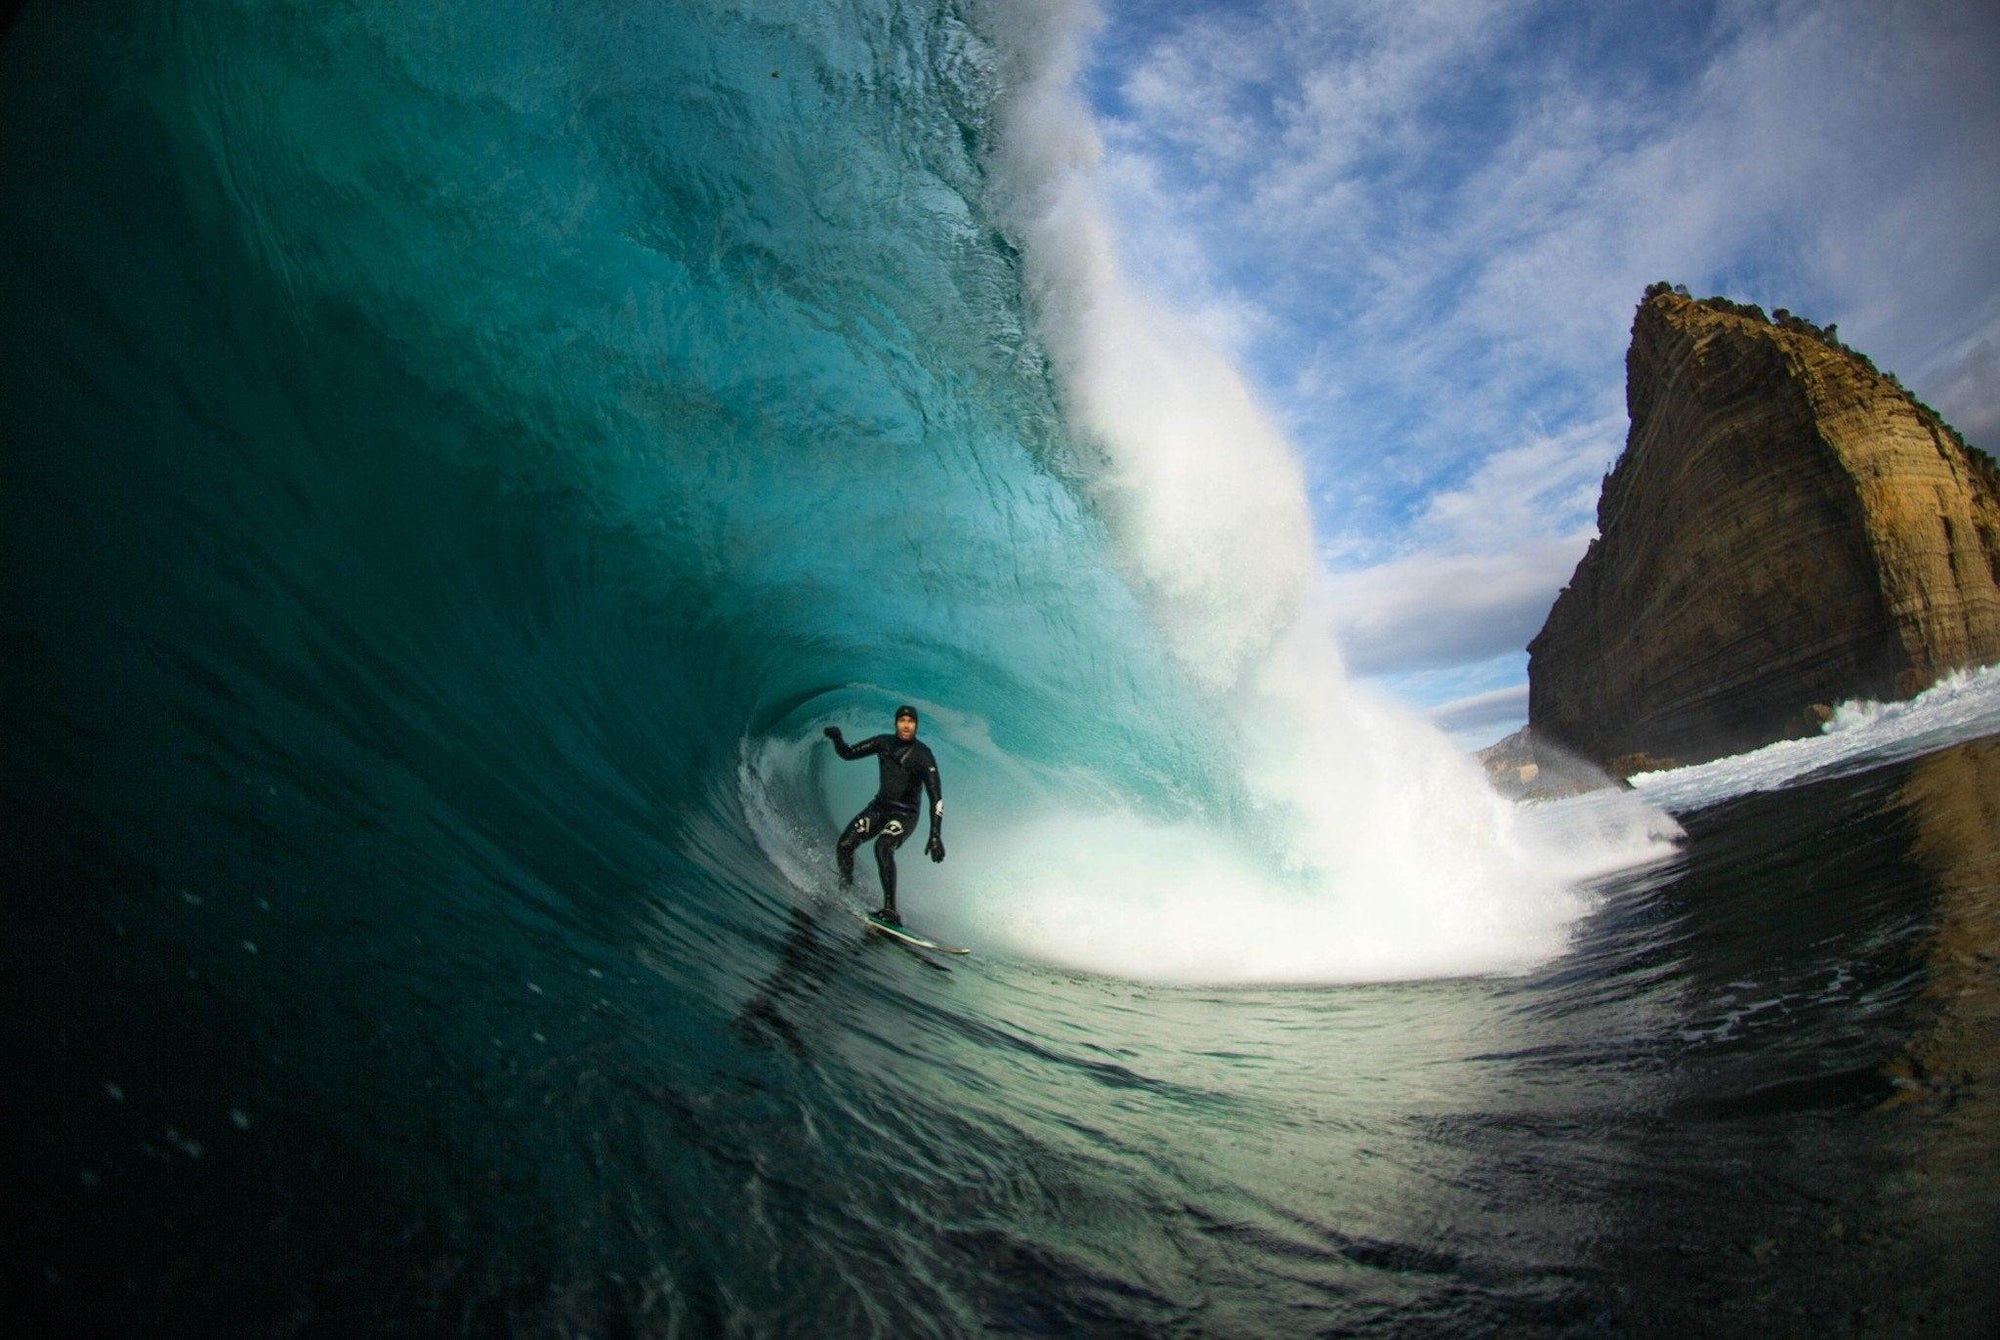 Nick Green in action filming surfing at Shipsterns, Tasmania Australia